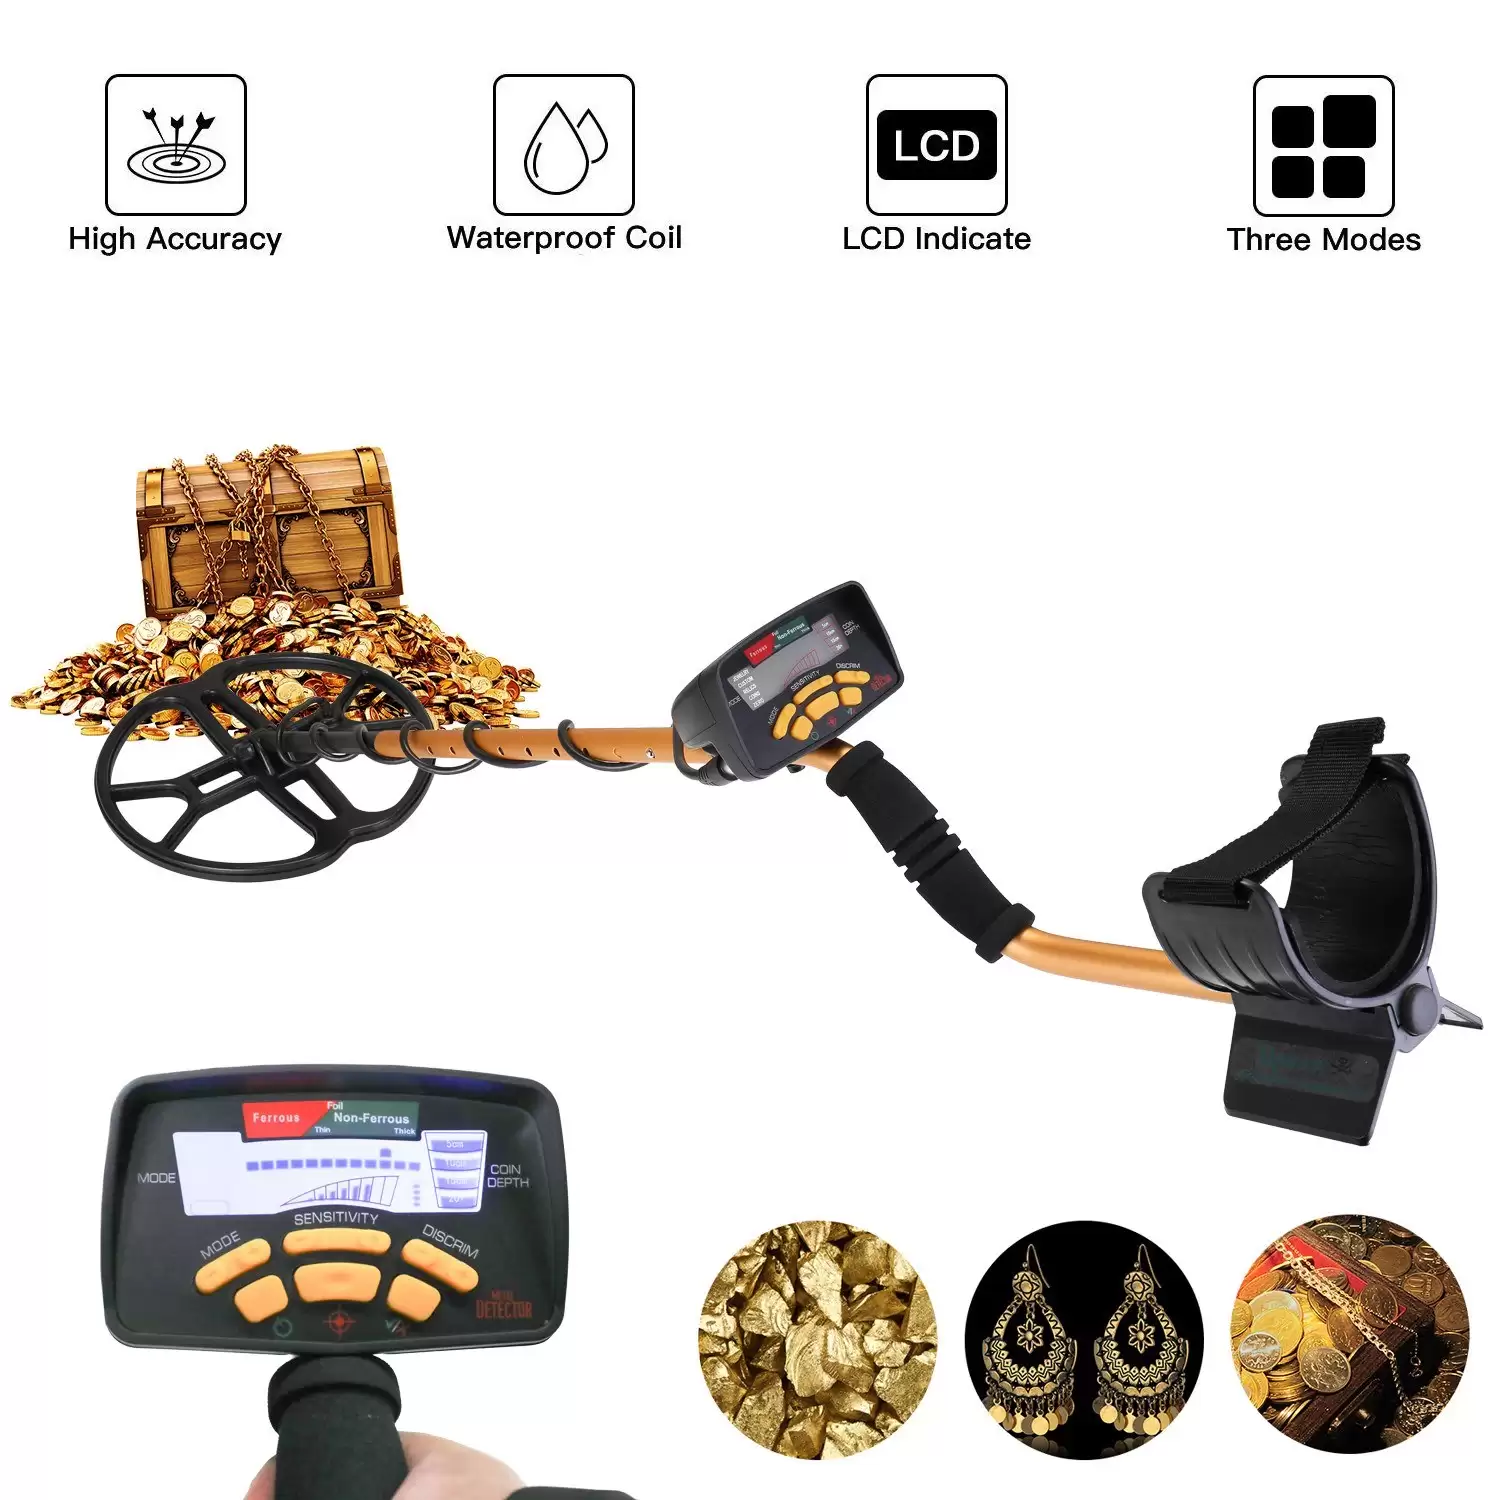 Order In Just $163.11 Portable Underground Metal Detector With This Discount Coupon At Cafago